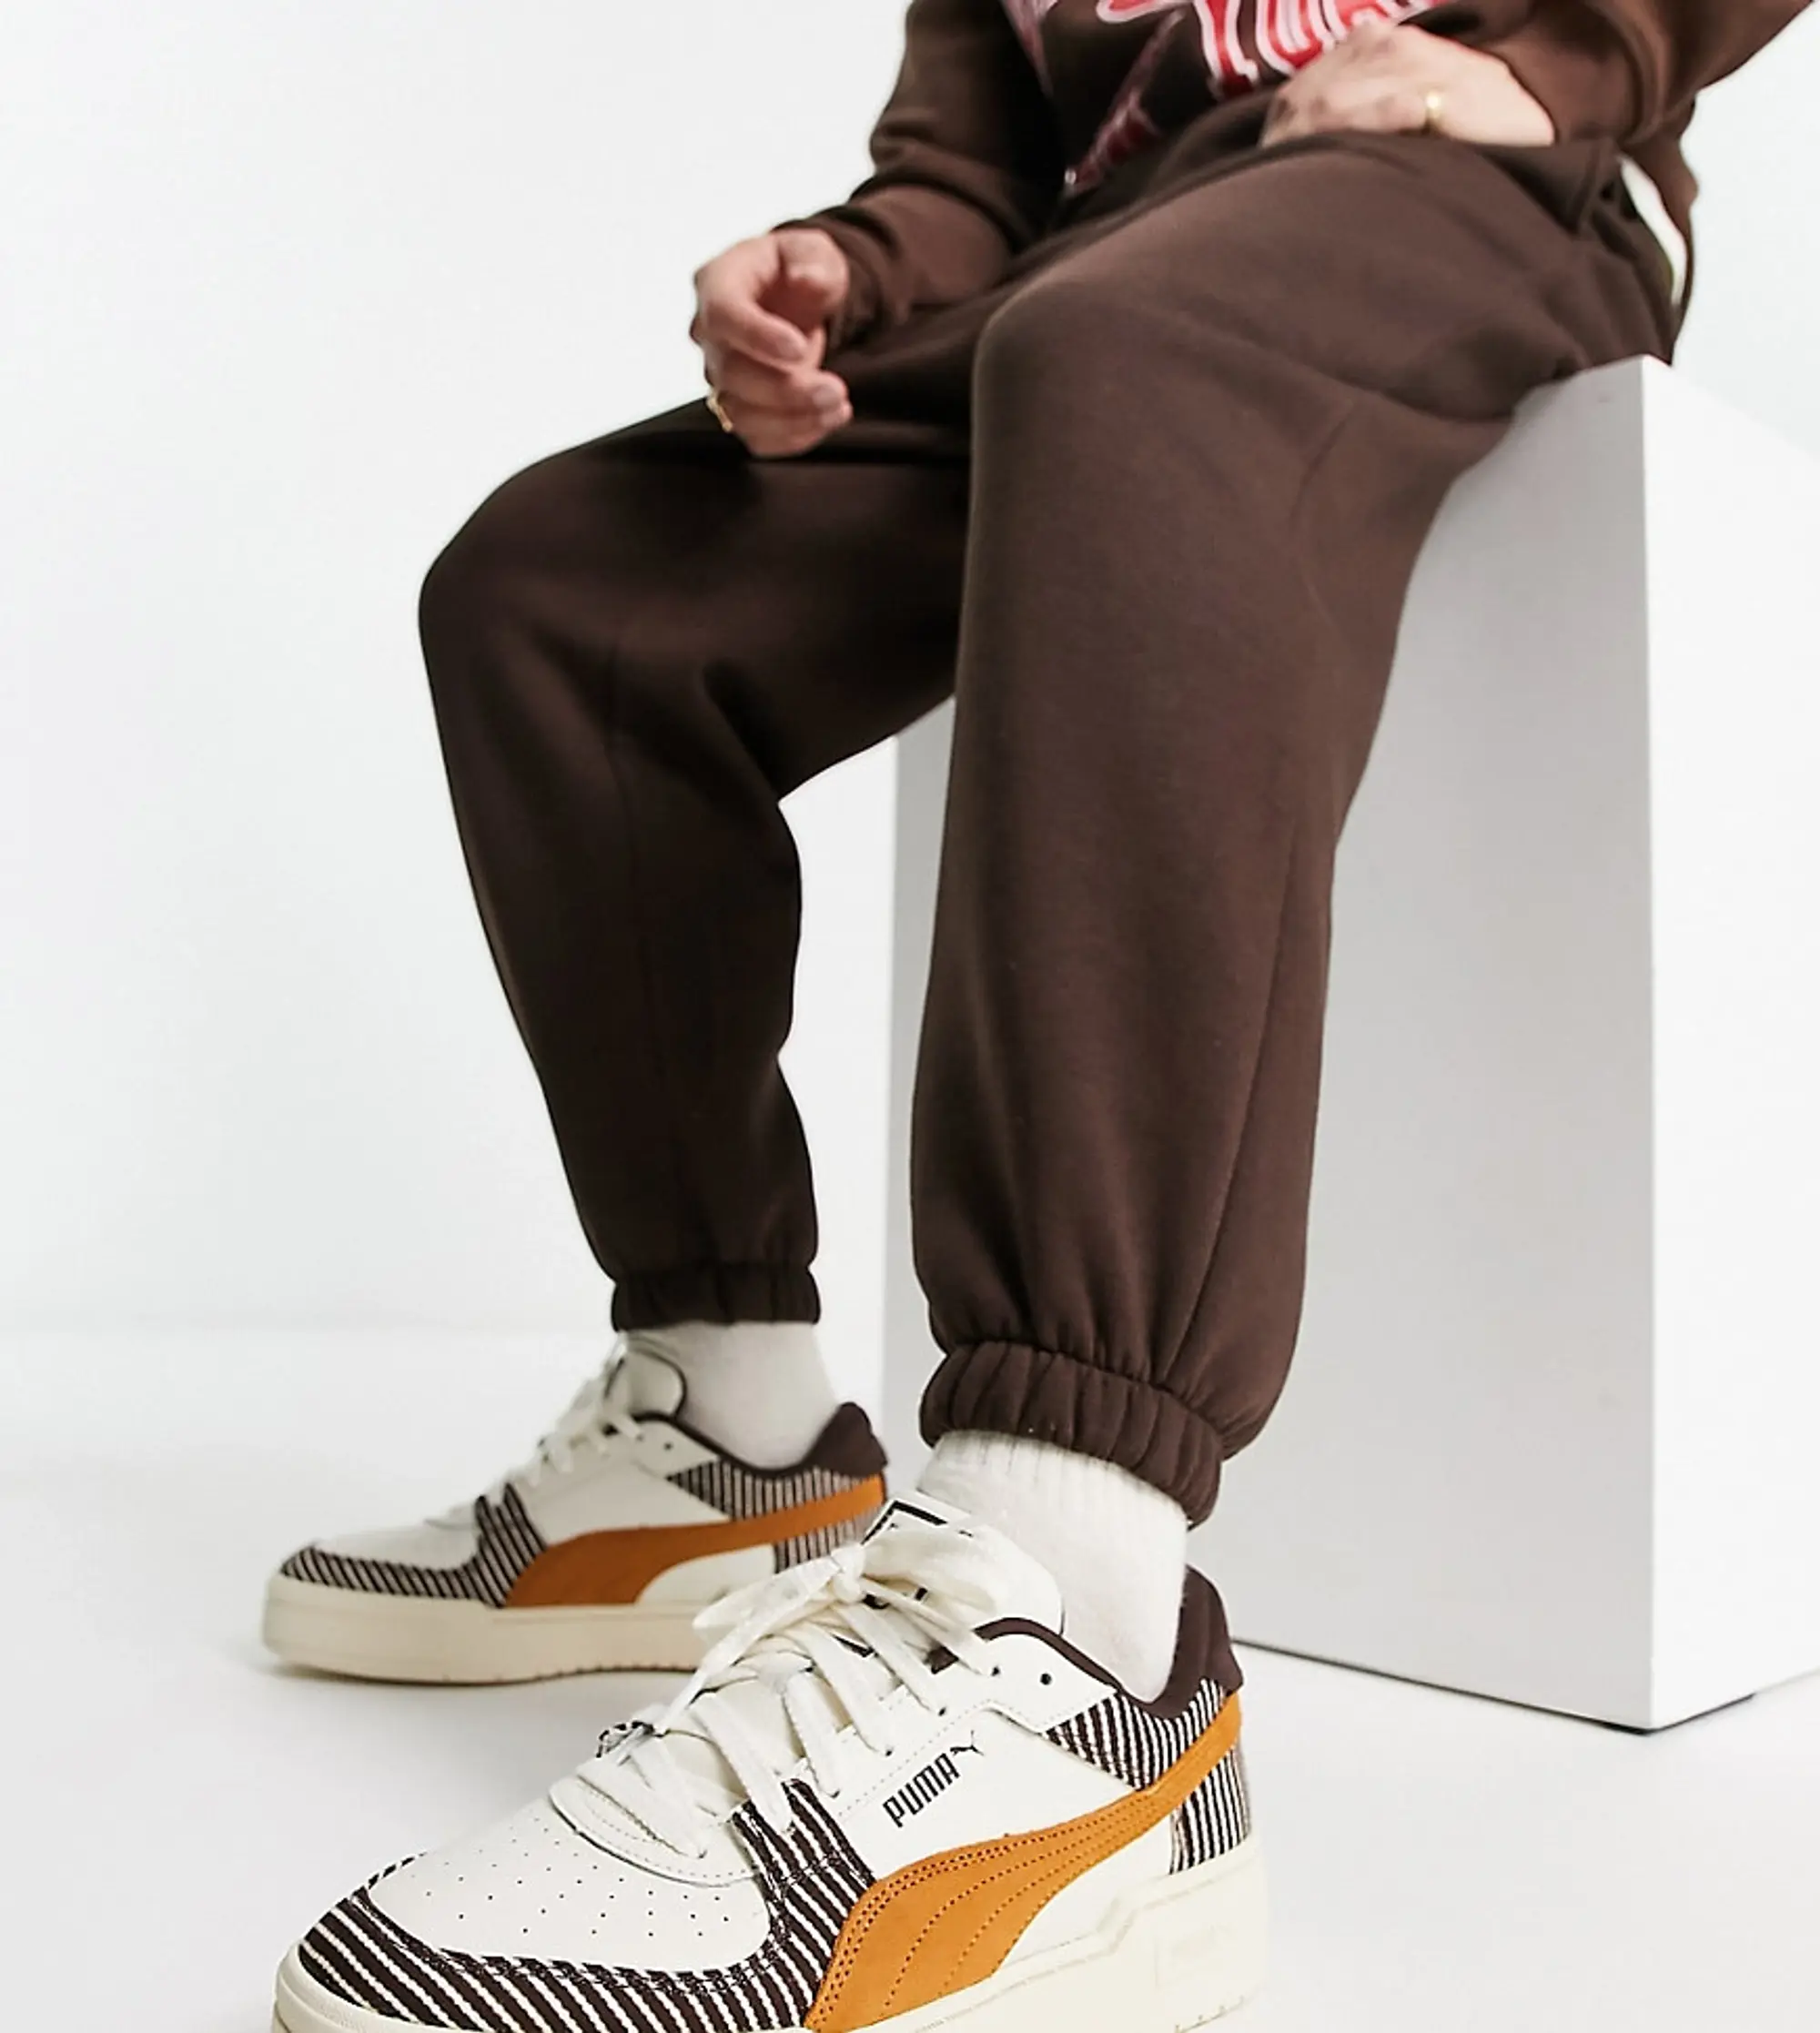 Puma Ca Pro Patchwork Trainers In Off White And Brown - Exclusive To Asos-Neutral